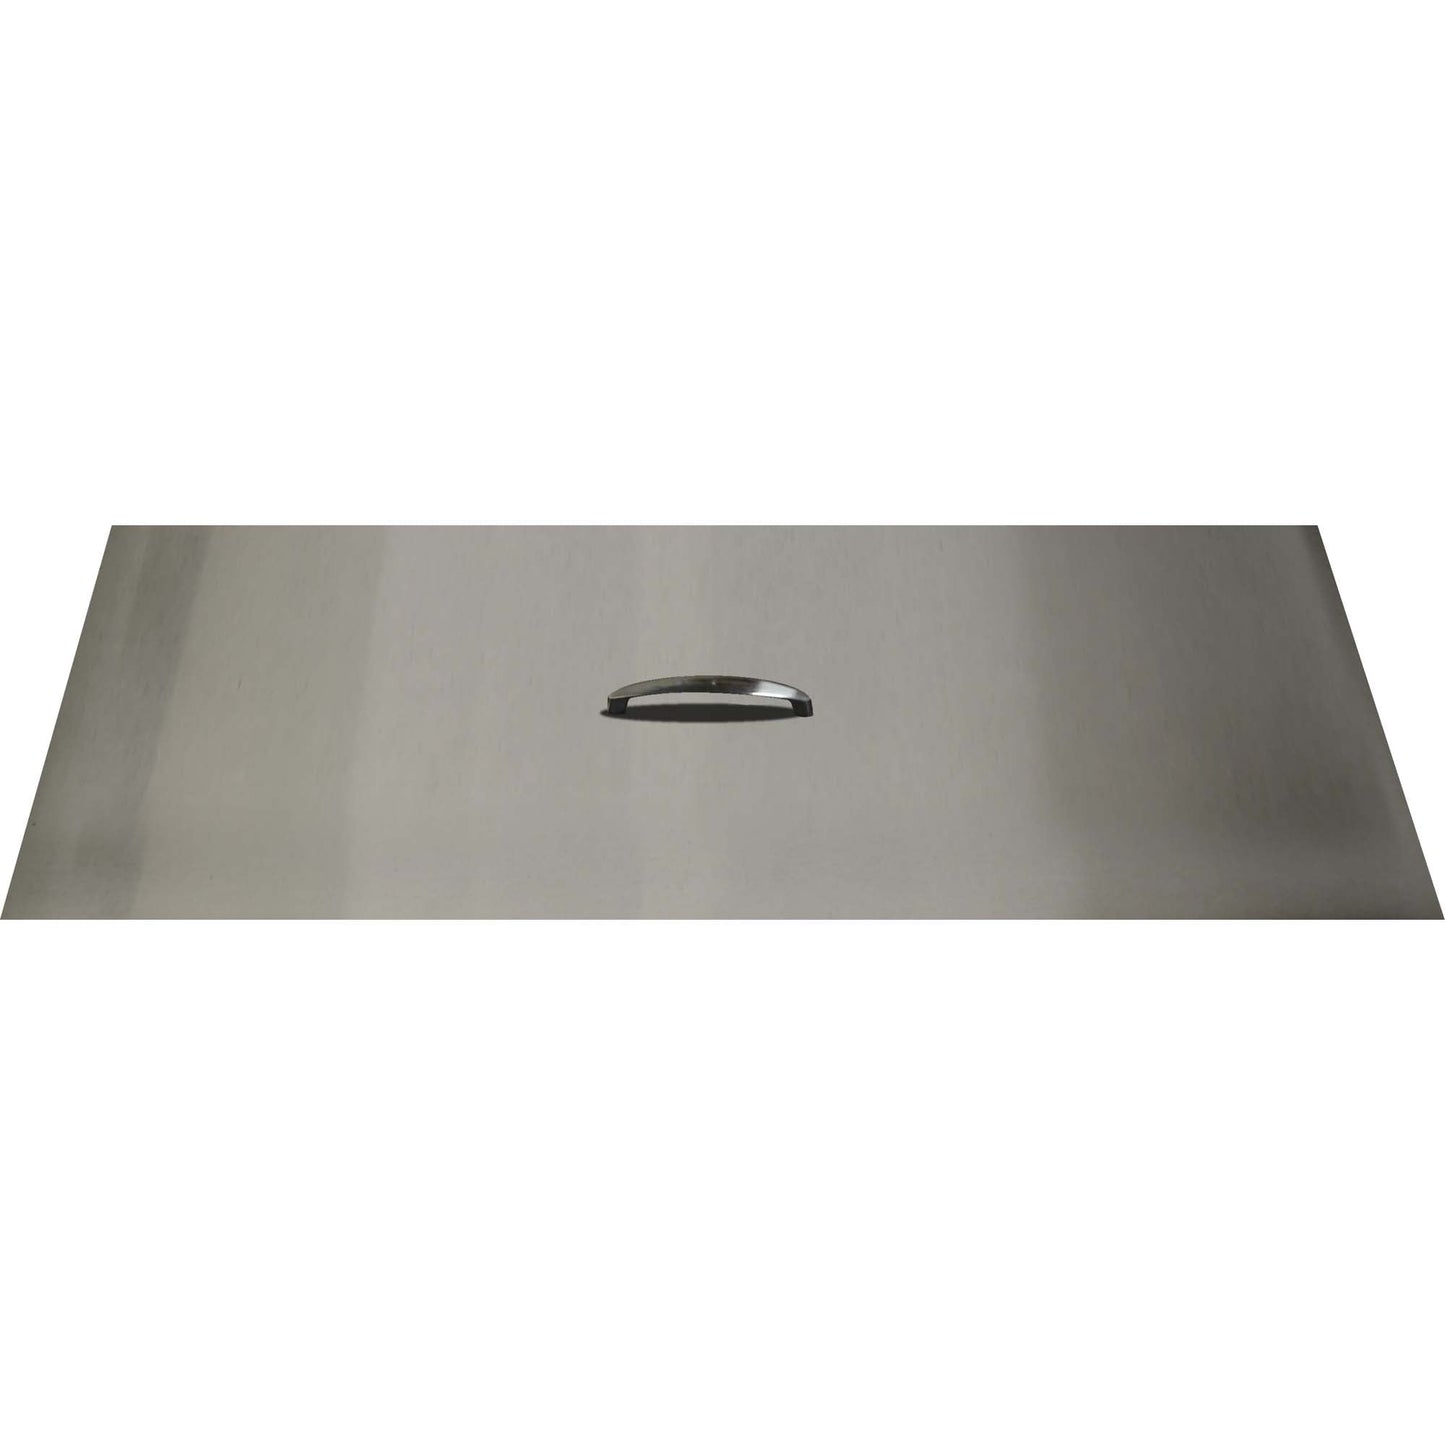 10" x 20" Rectangular Stainless Steel Cover - Stainless Steel Handle-Novel Home